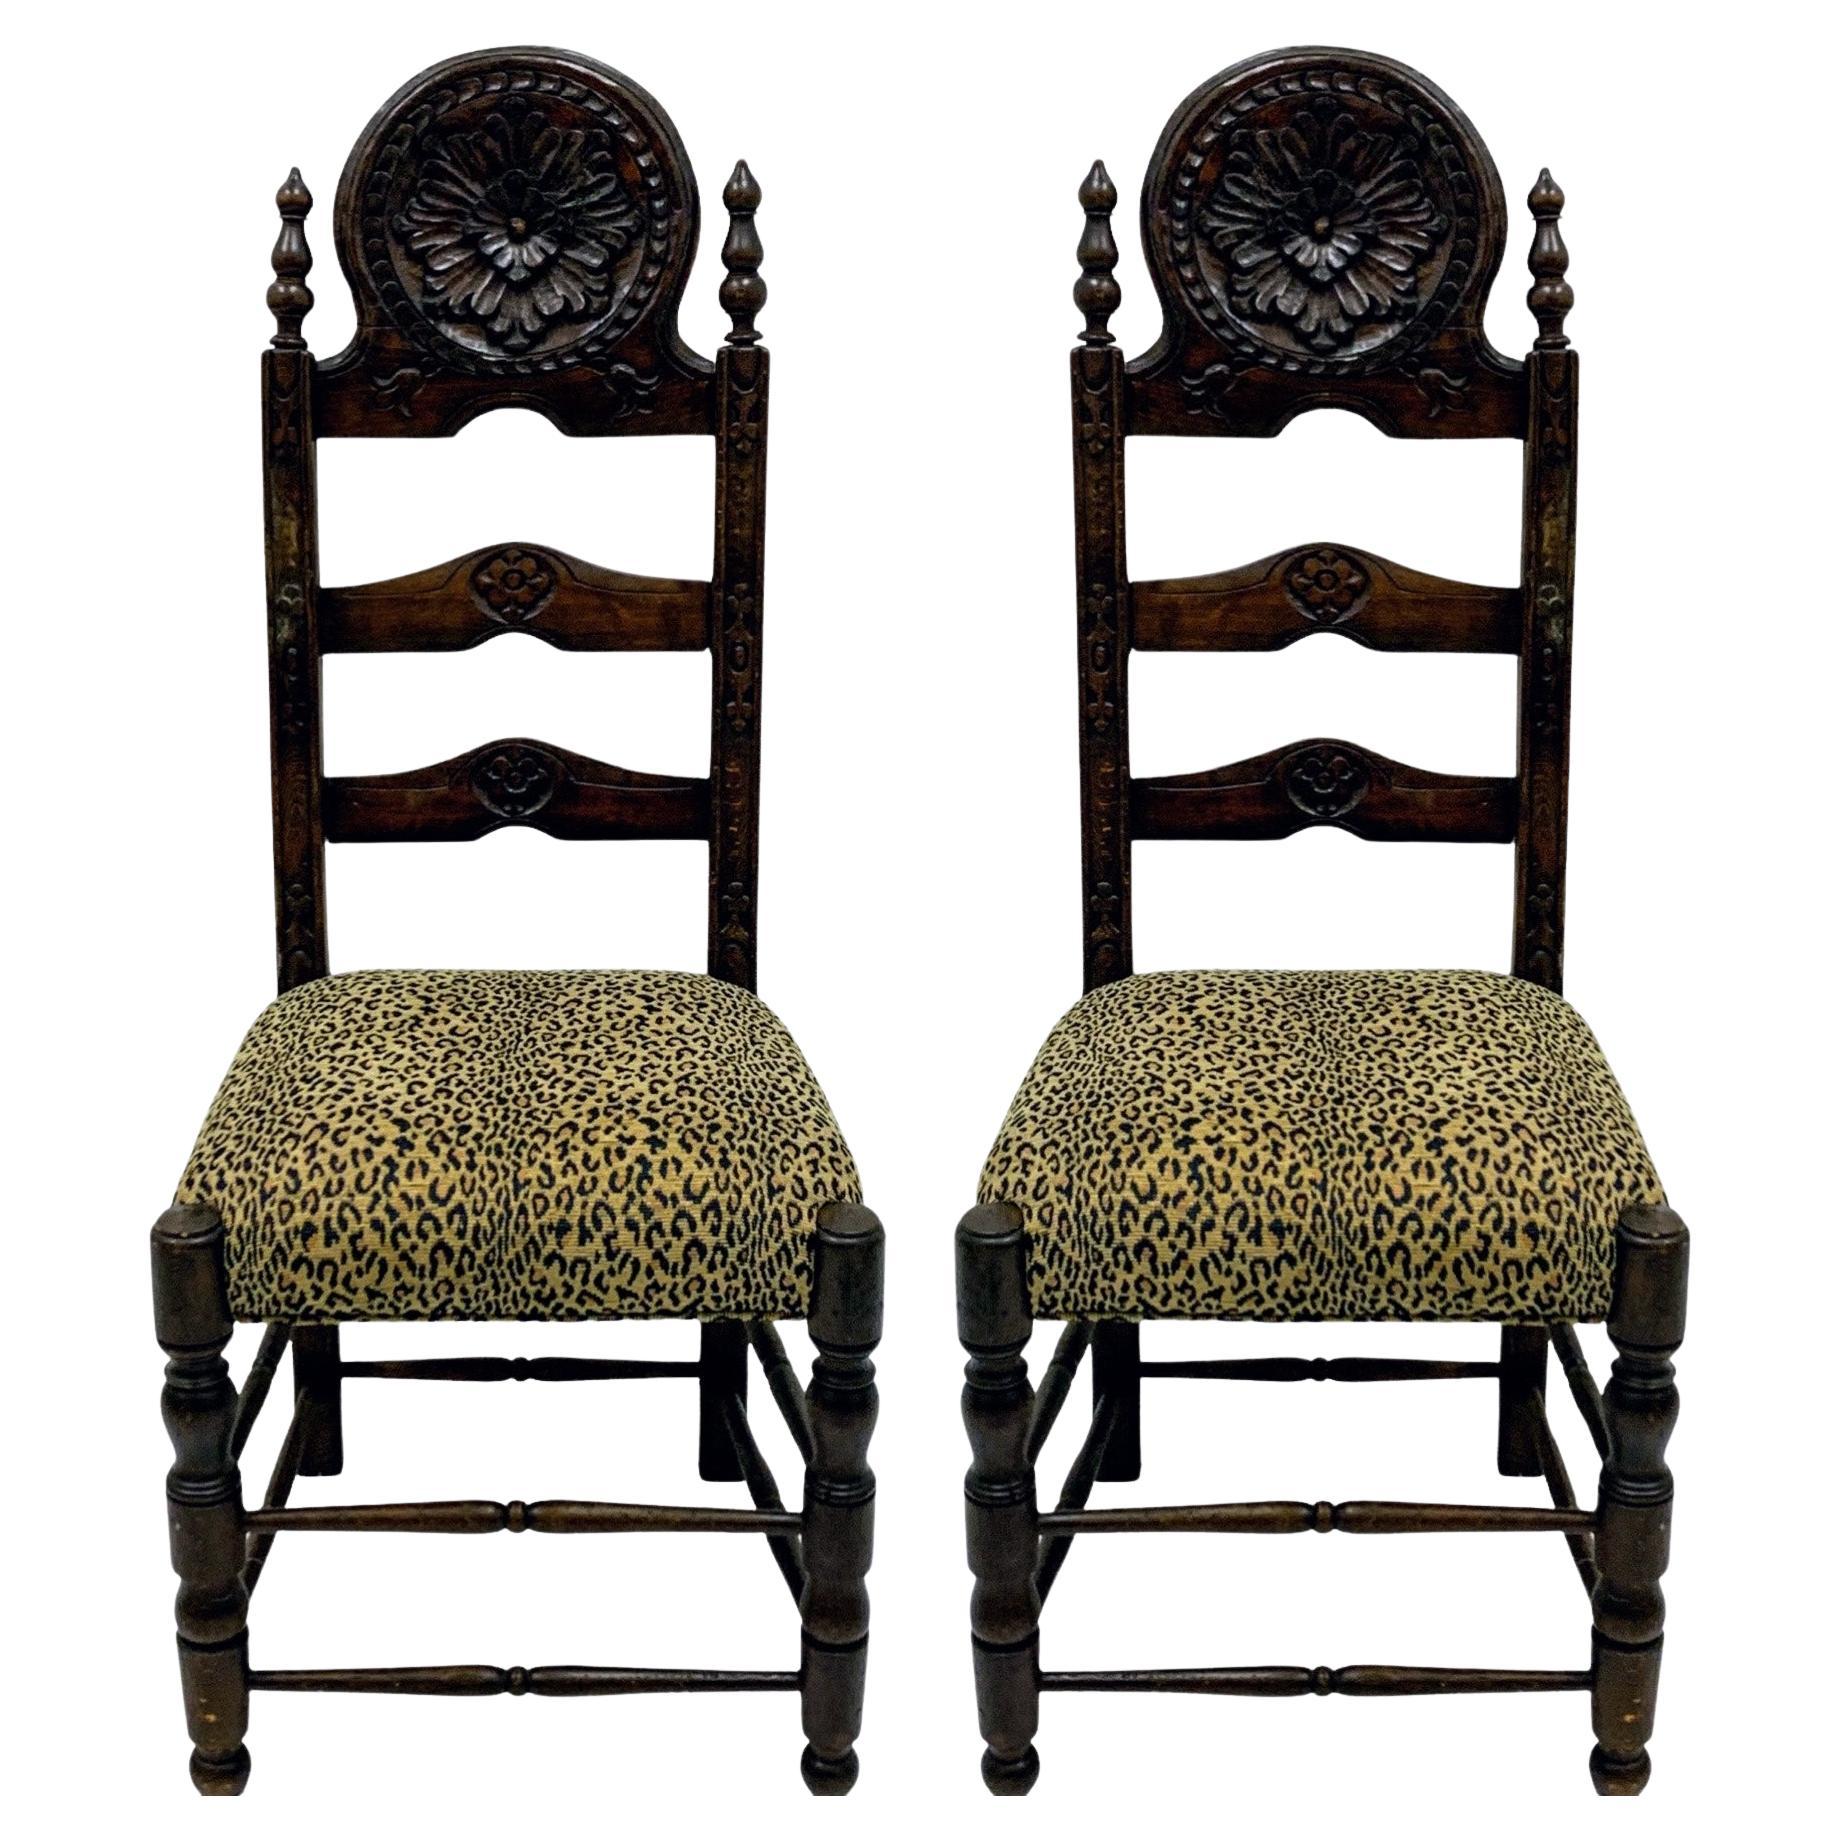 19th-C. French Carved Oak Ladder Back Side Chairs In Vintage Leopard - Pair For Sale